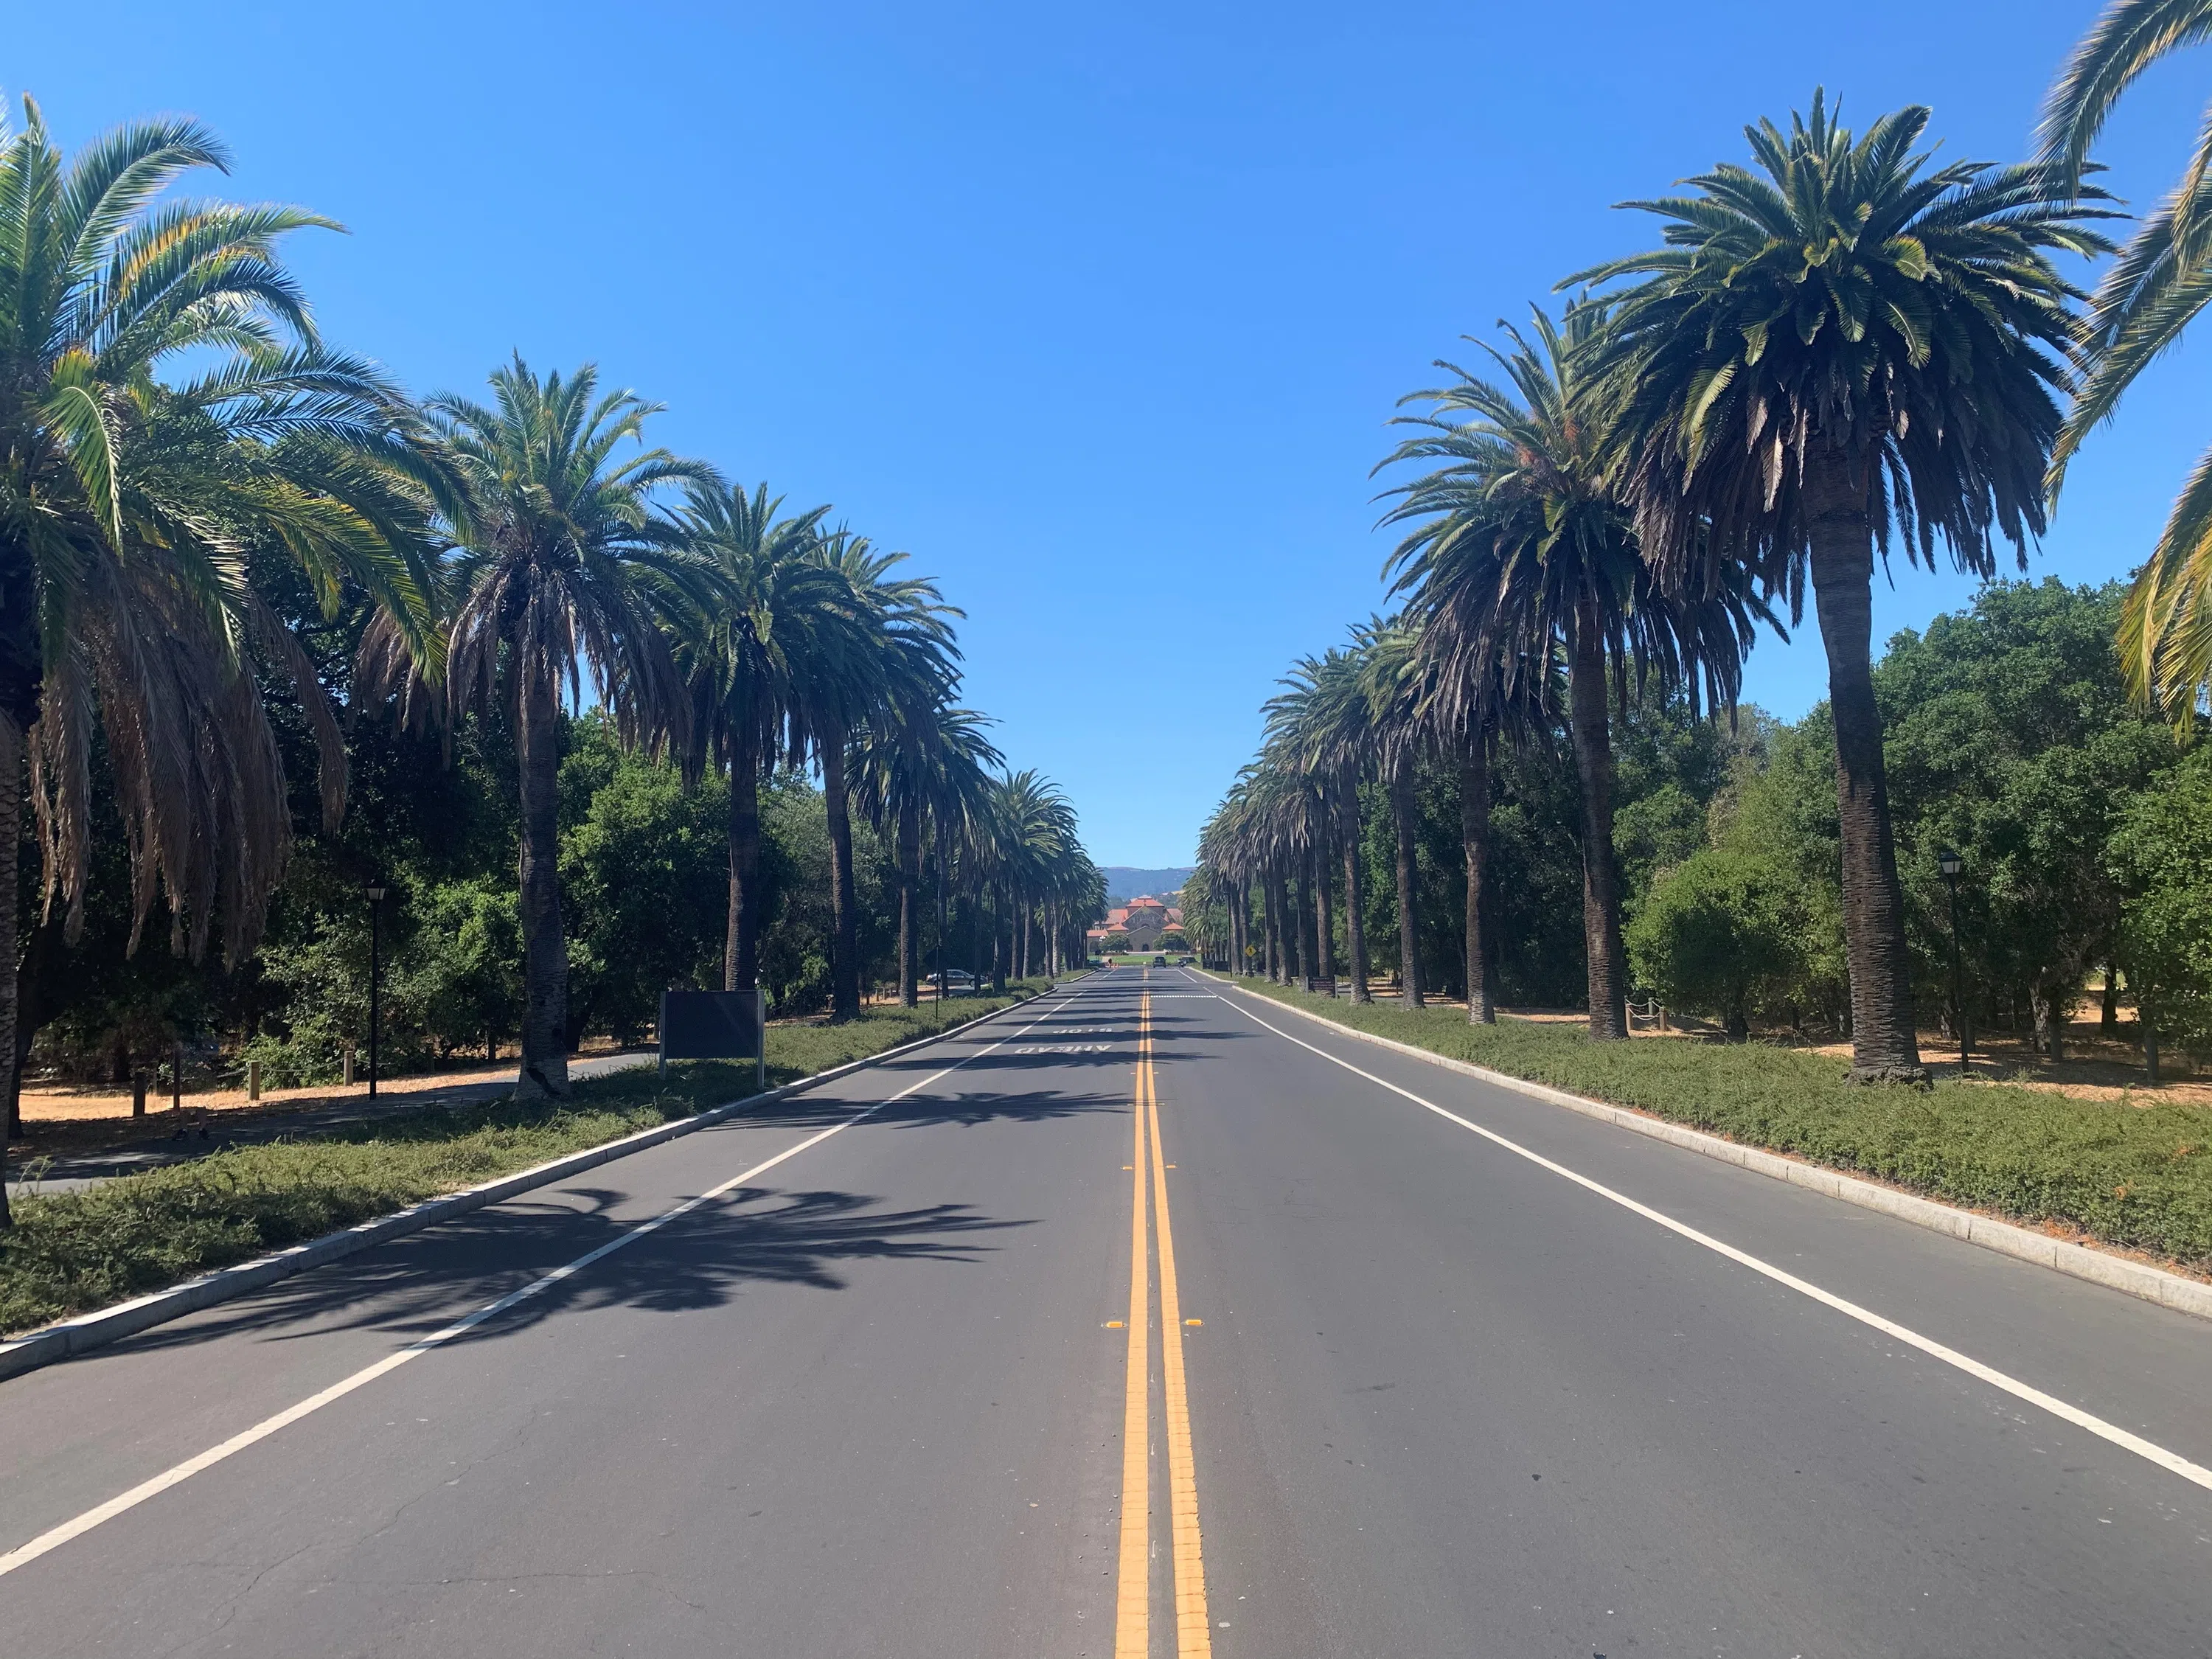 Long view of Palm Drive, the road leading to Stanford's Main Quad at the front of campus, lined on each side by palm trees